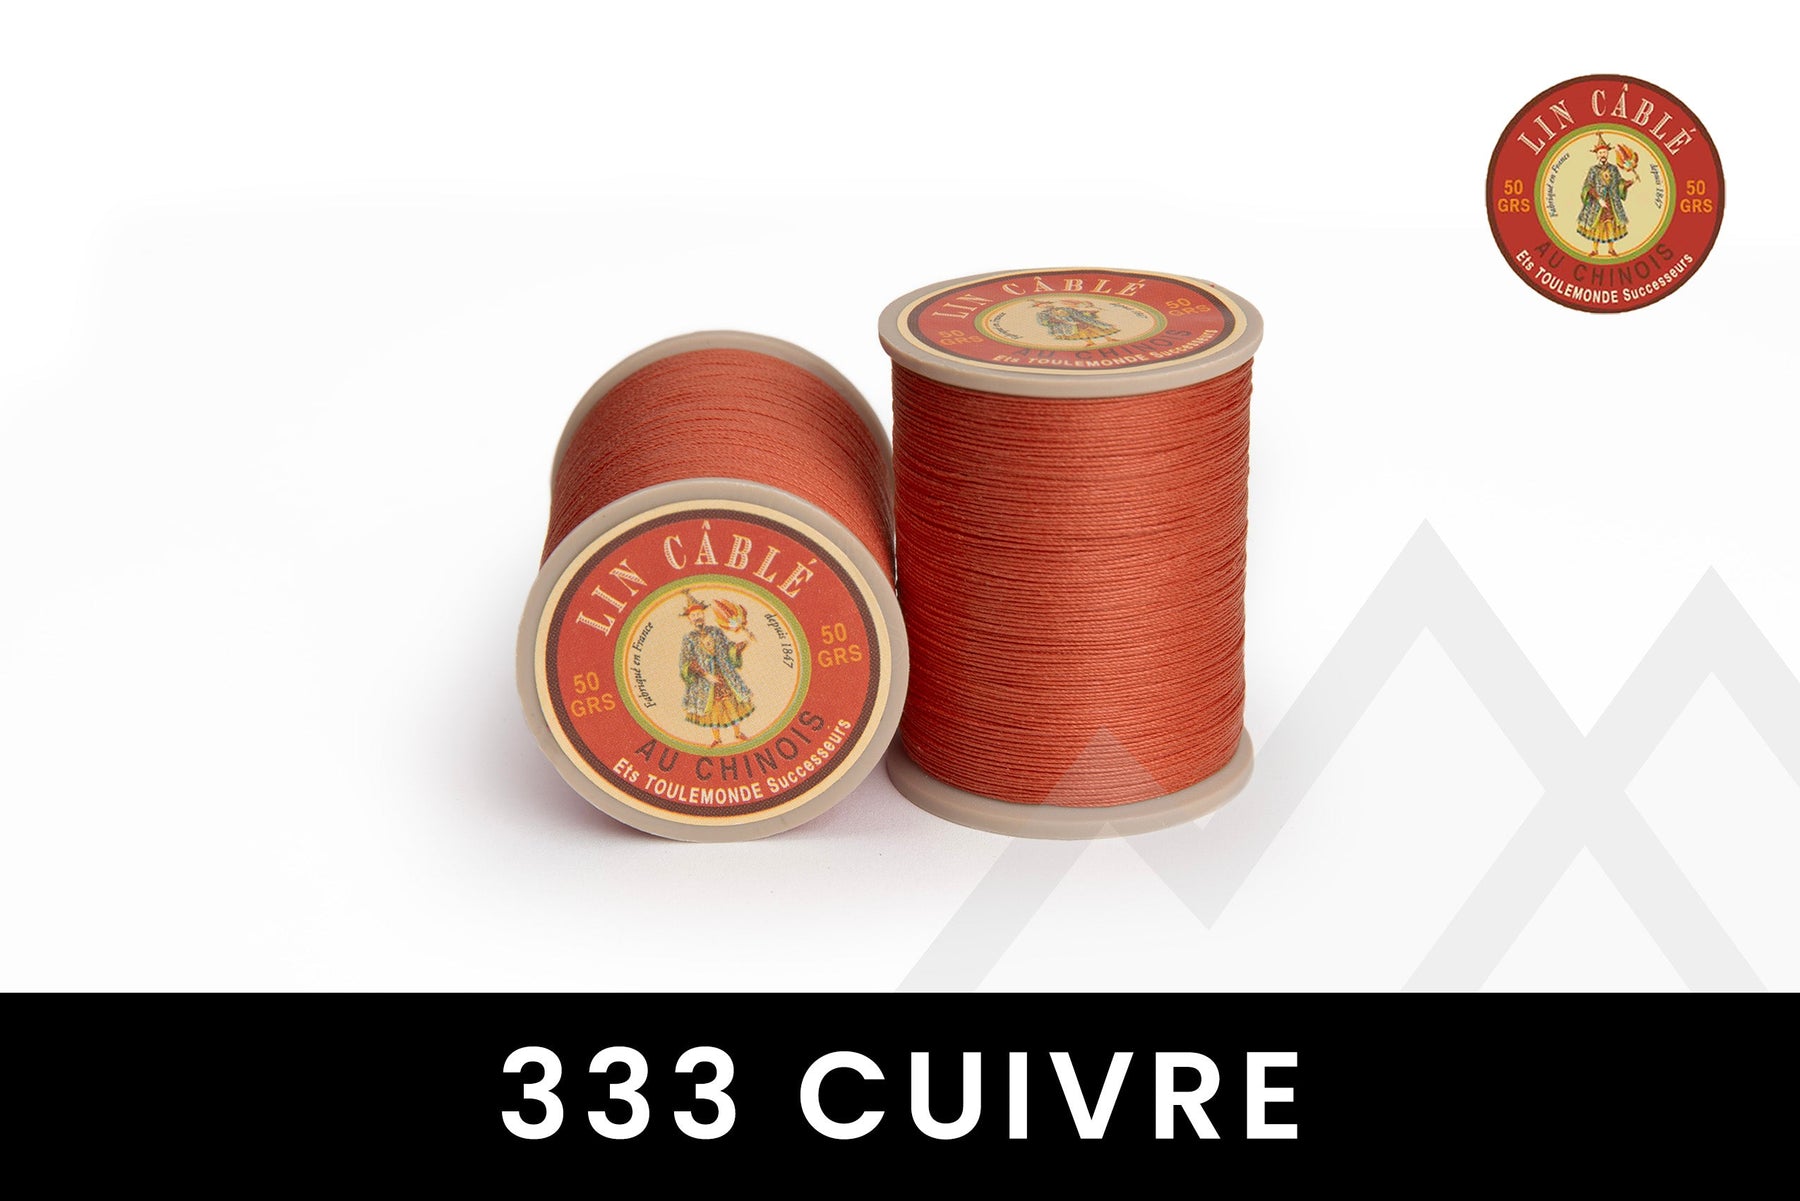 Fil au Chinois 🇫🇷 - "Lin Cable" Waxed Linen Thread (Size 632) *Full Spool